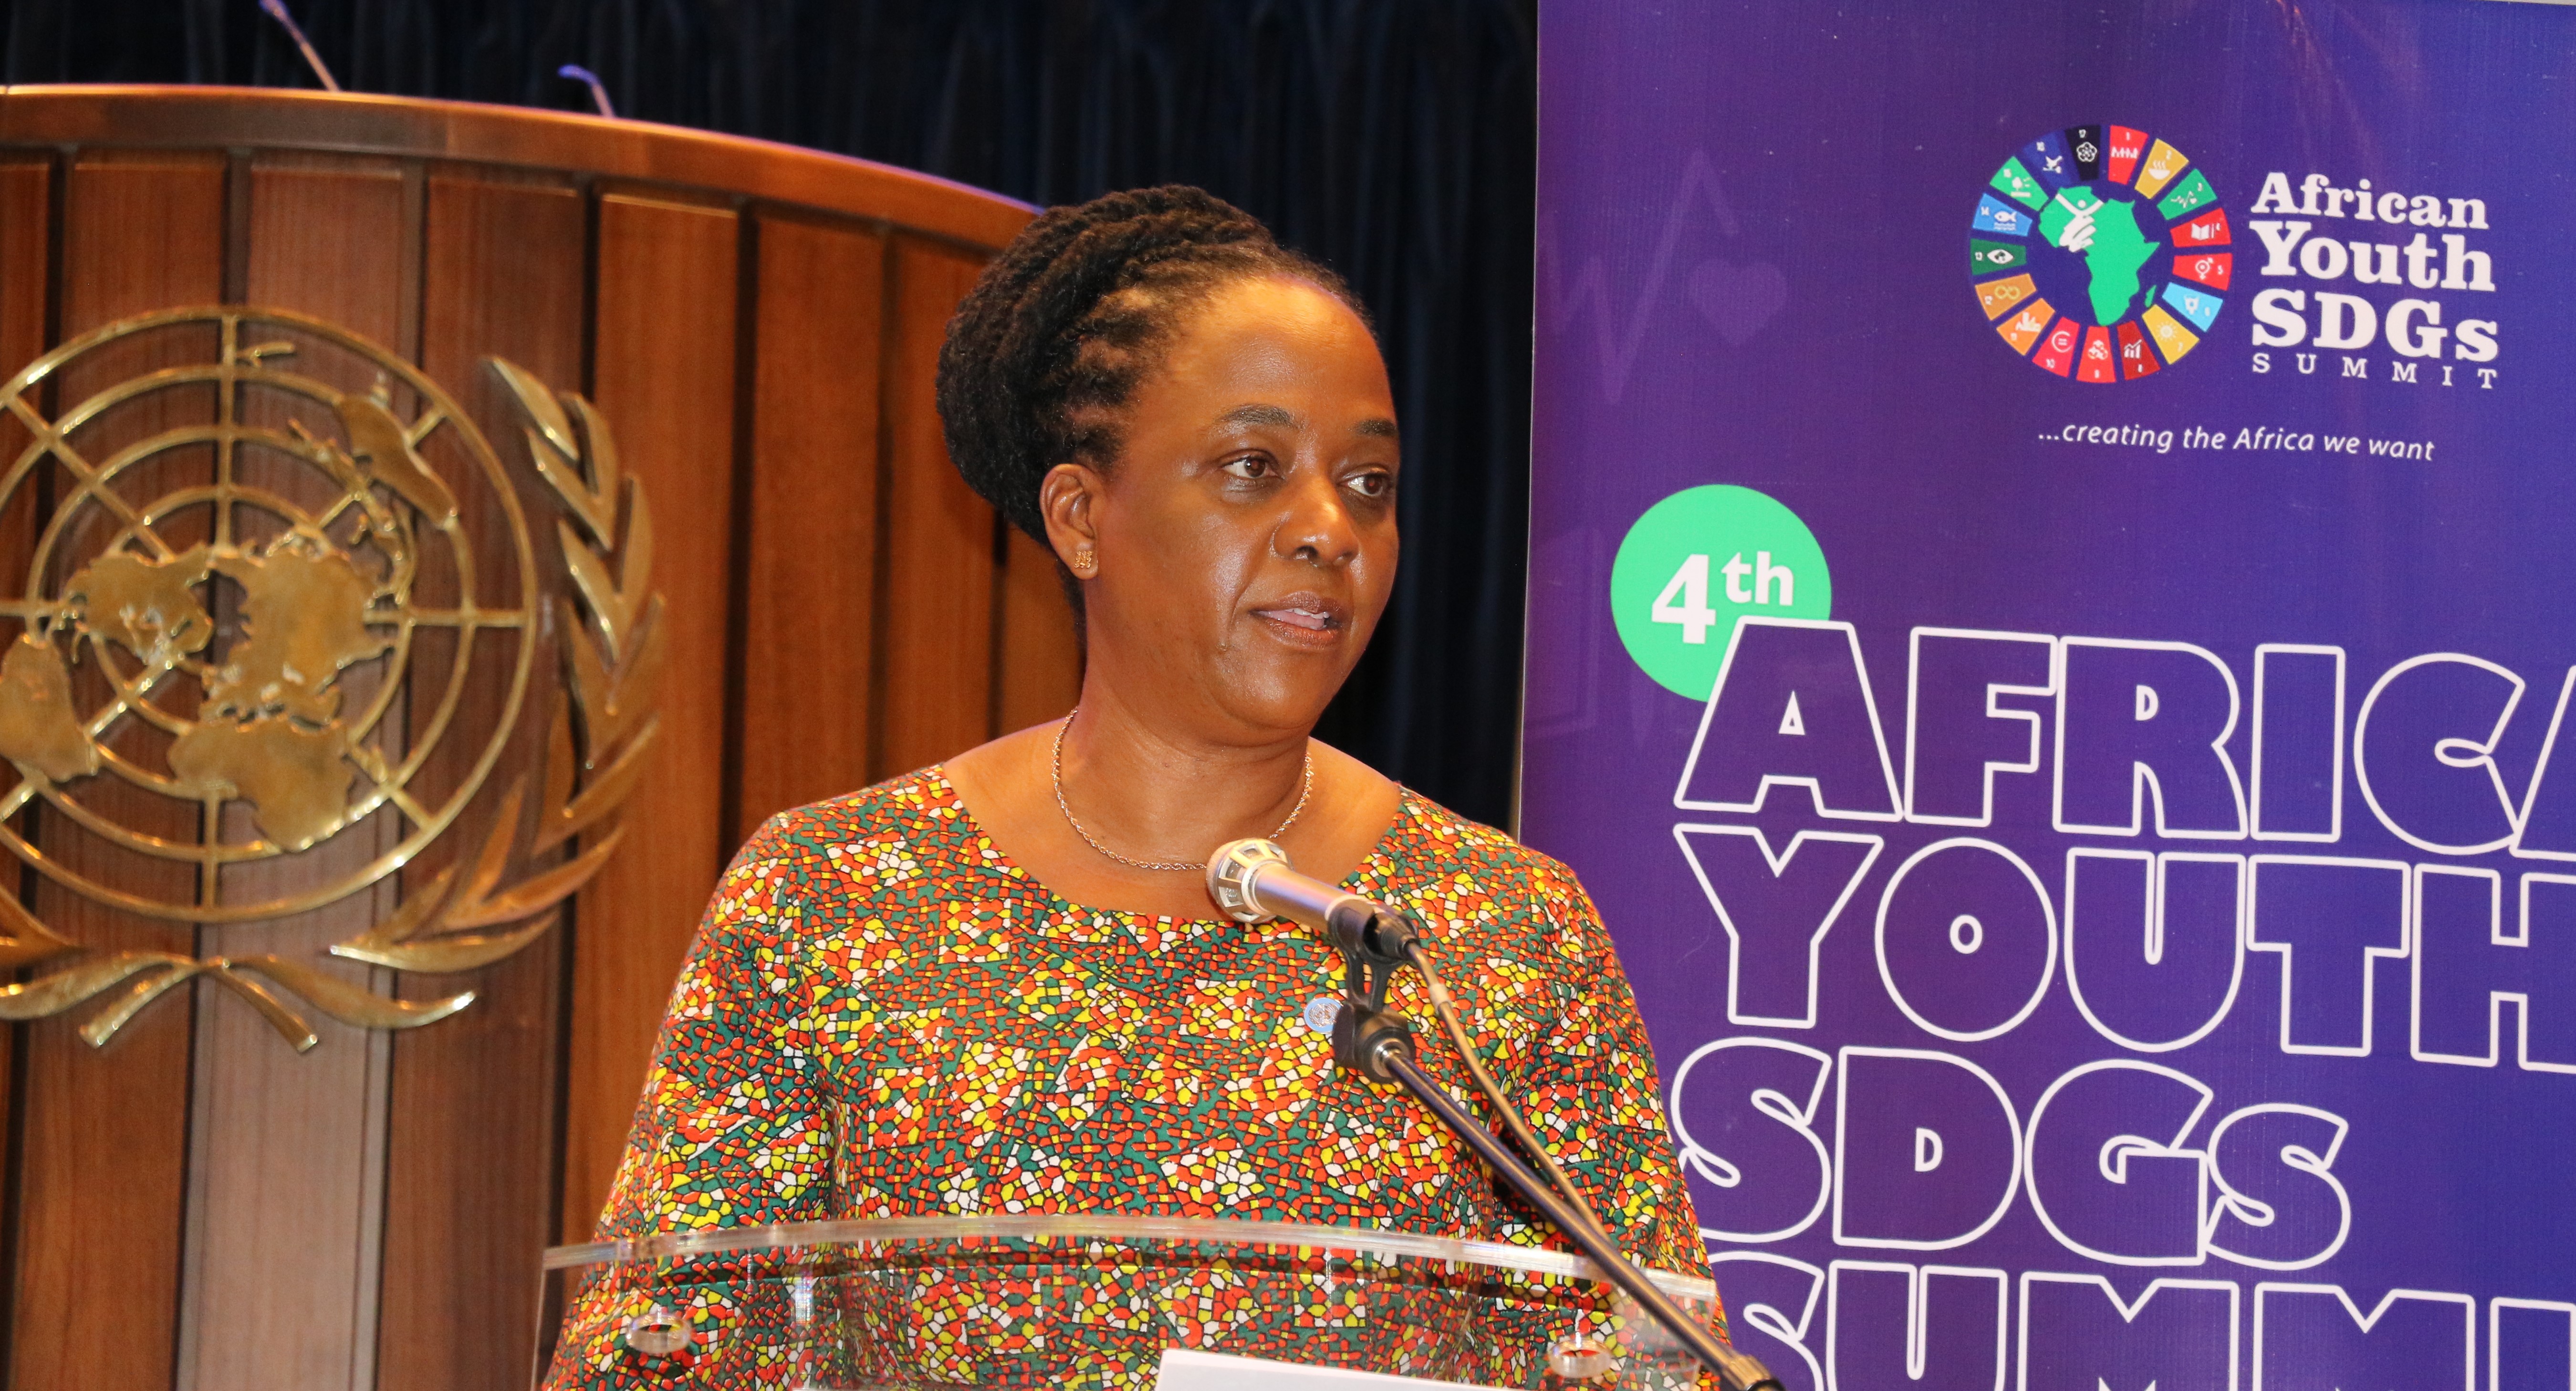 The 4th African Youth SDGs Summit underscores crucial role of young people in accelerating achievement of SDGs